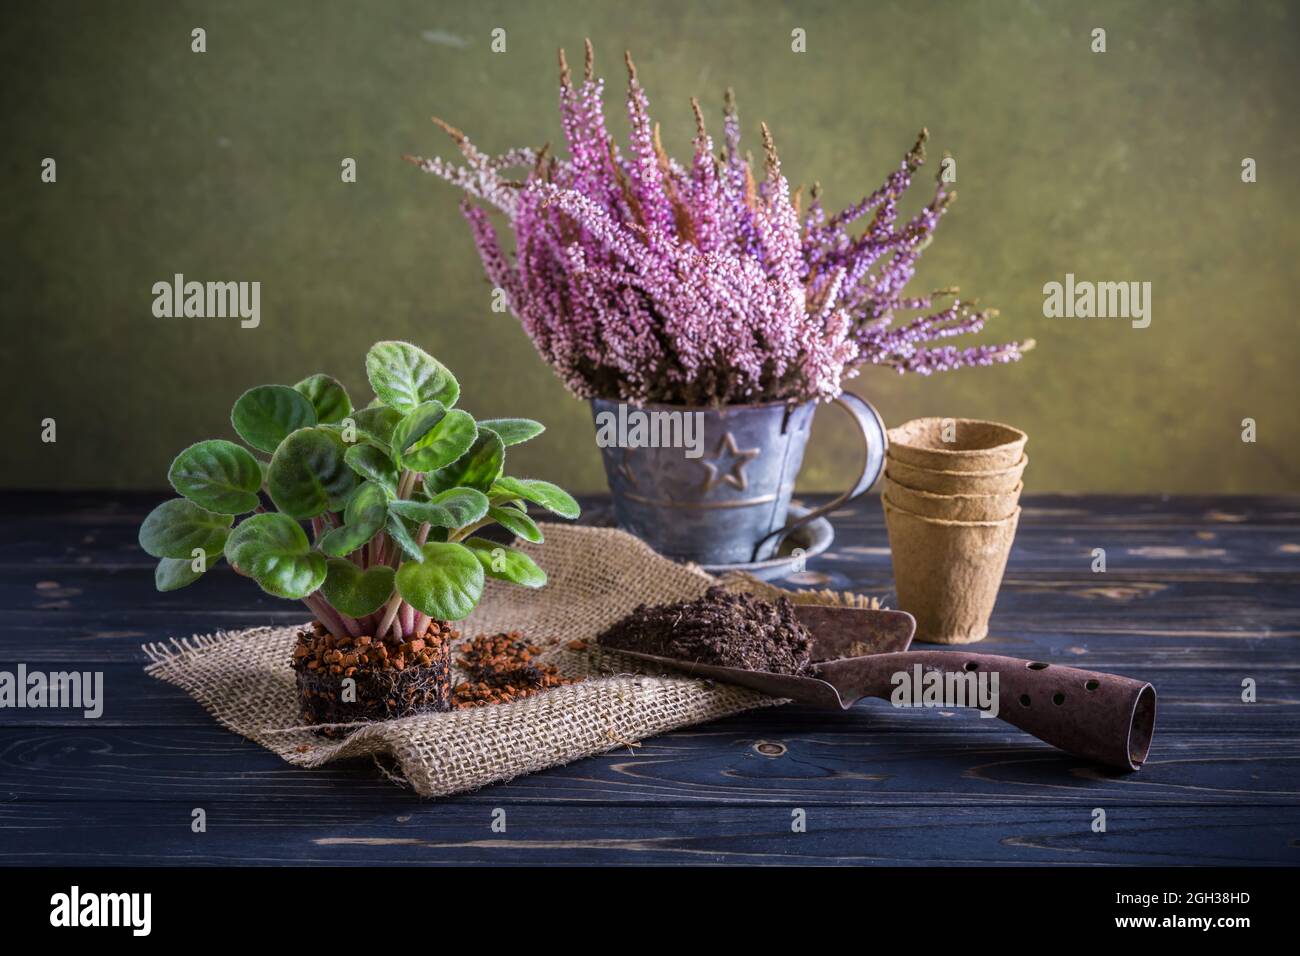 Gardening and replanting - Erica gracilis in pot and indoor plant with gardening tools Stock Photo